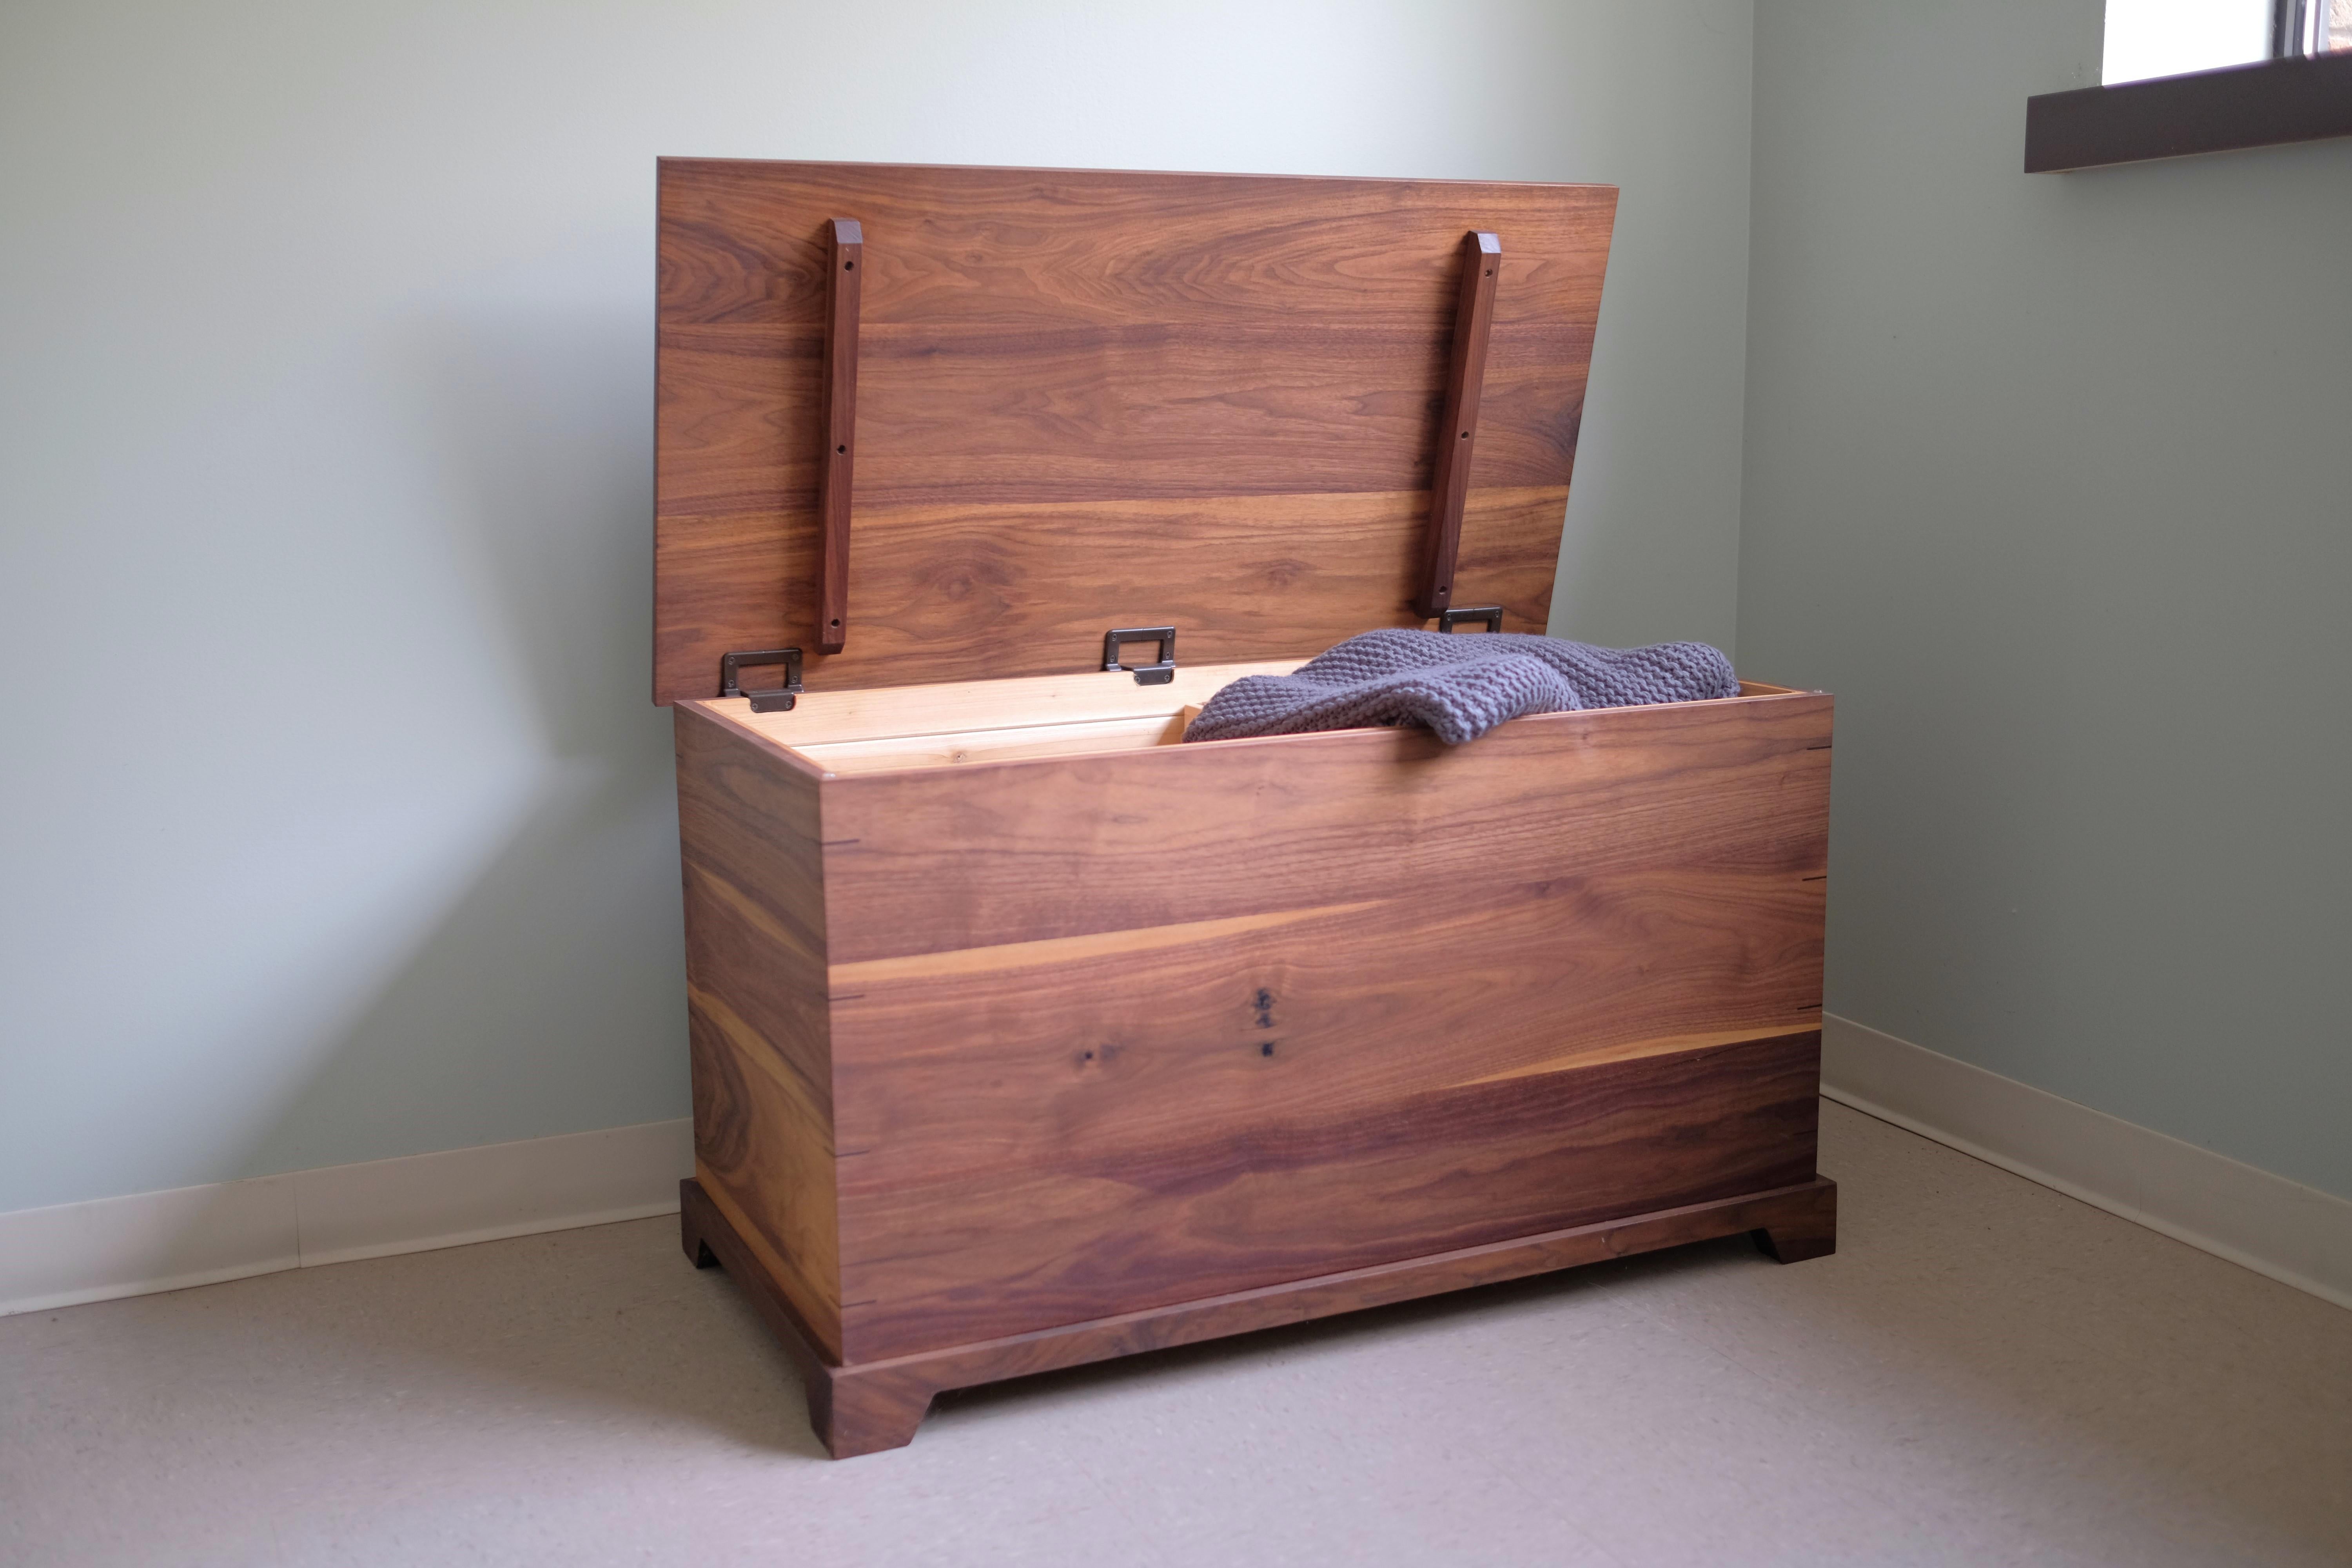 Our walnut storage trunk is heirloom quality, cedar lined and built to last generations! Handcrafted in our furniture studio and wood shop in Michigan. Assembled from premium Walnut and lovingly hand finished with a traditional hard wax oil. The